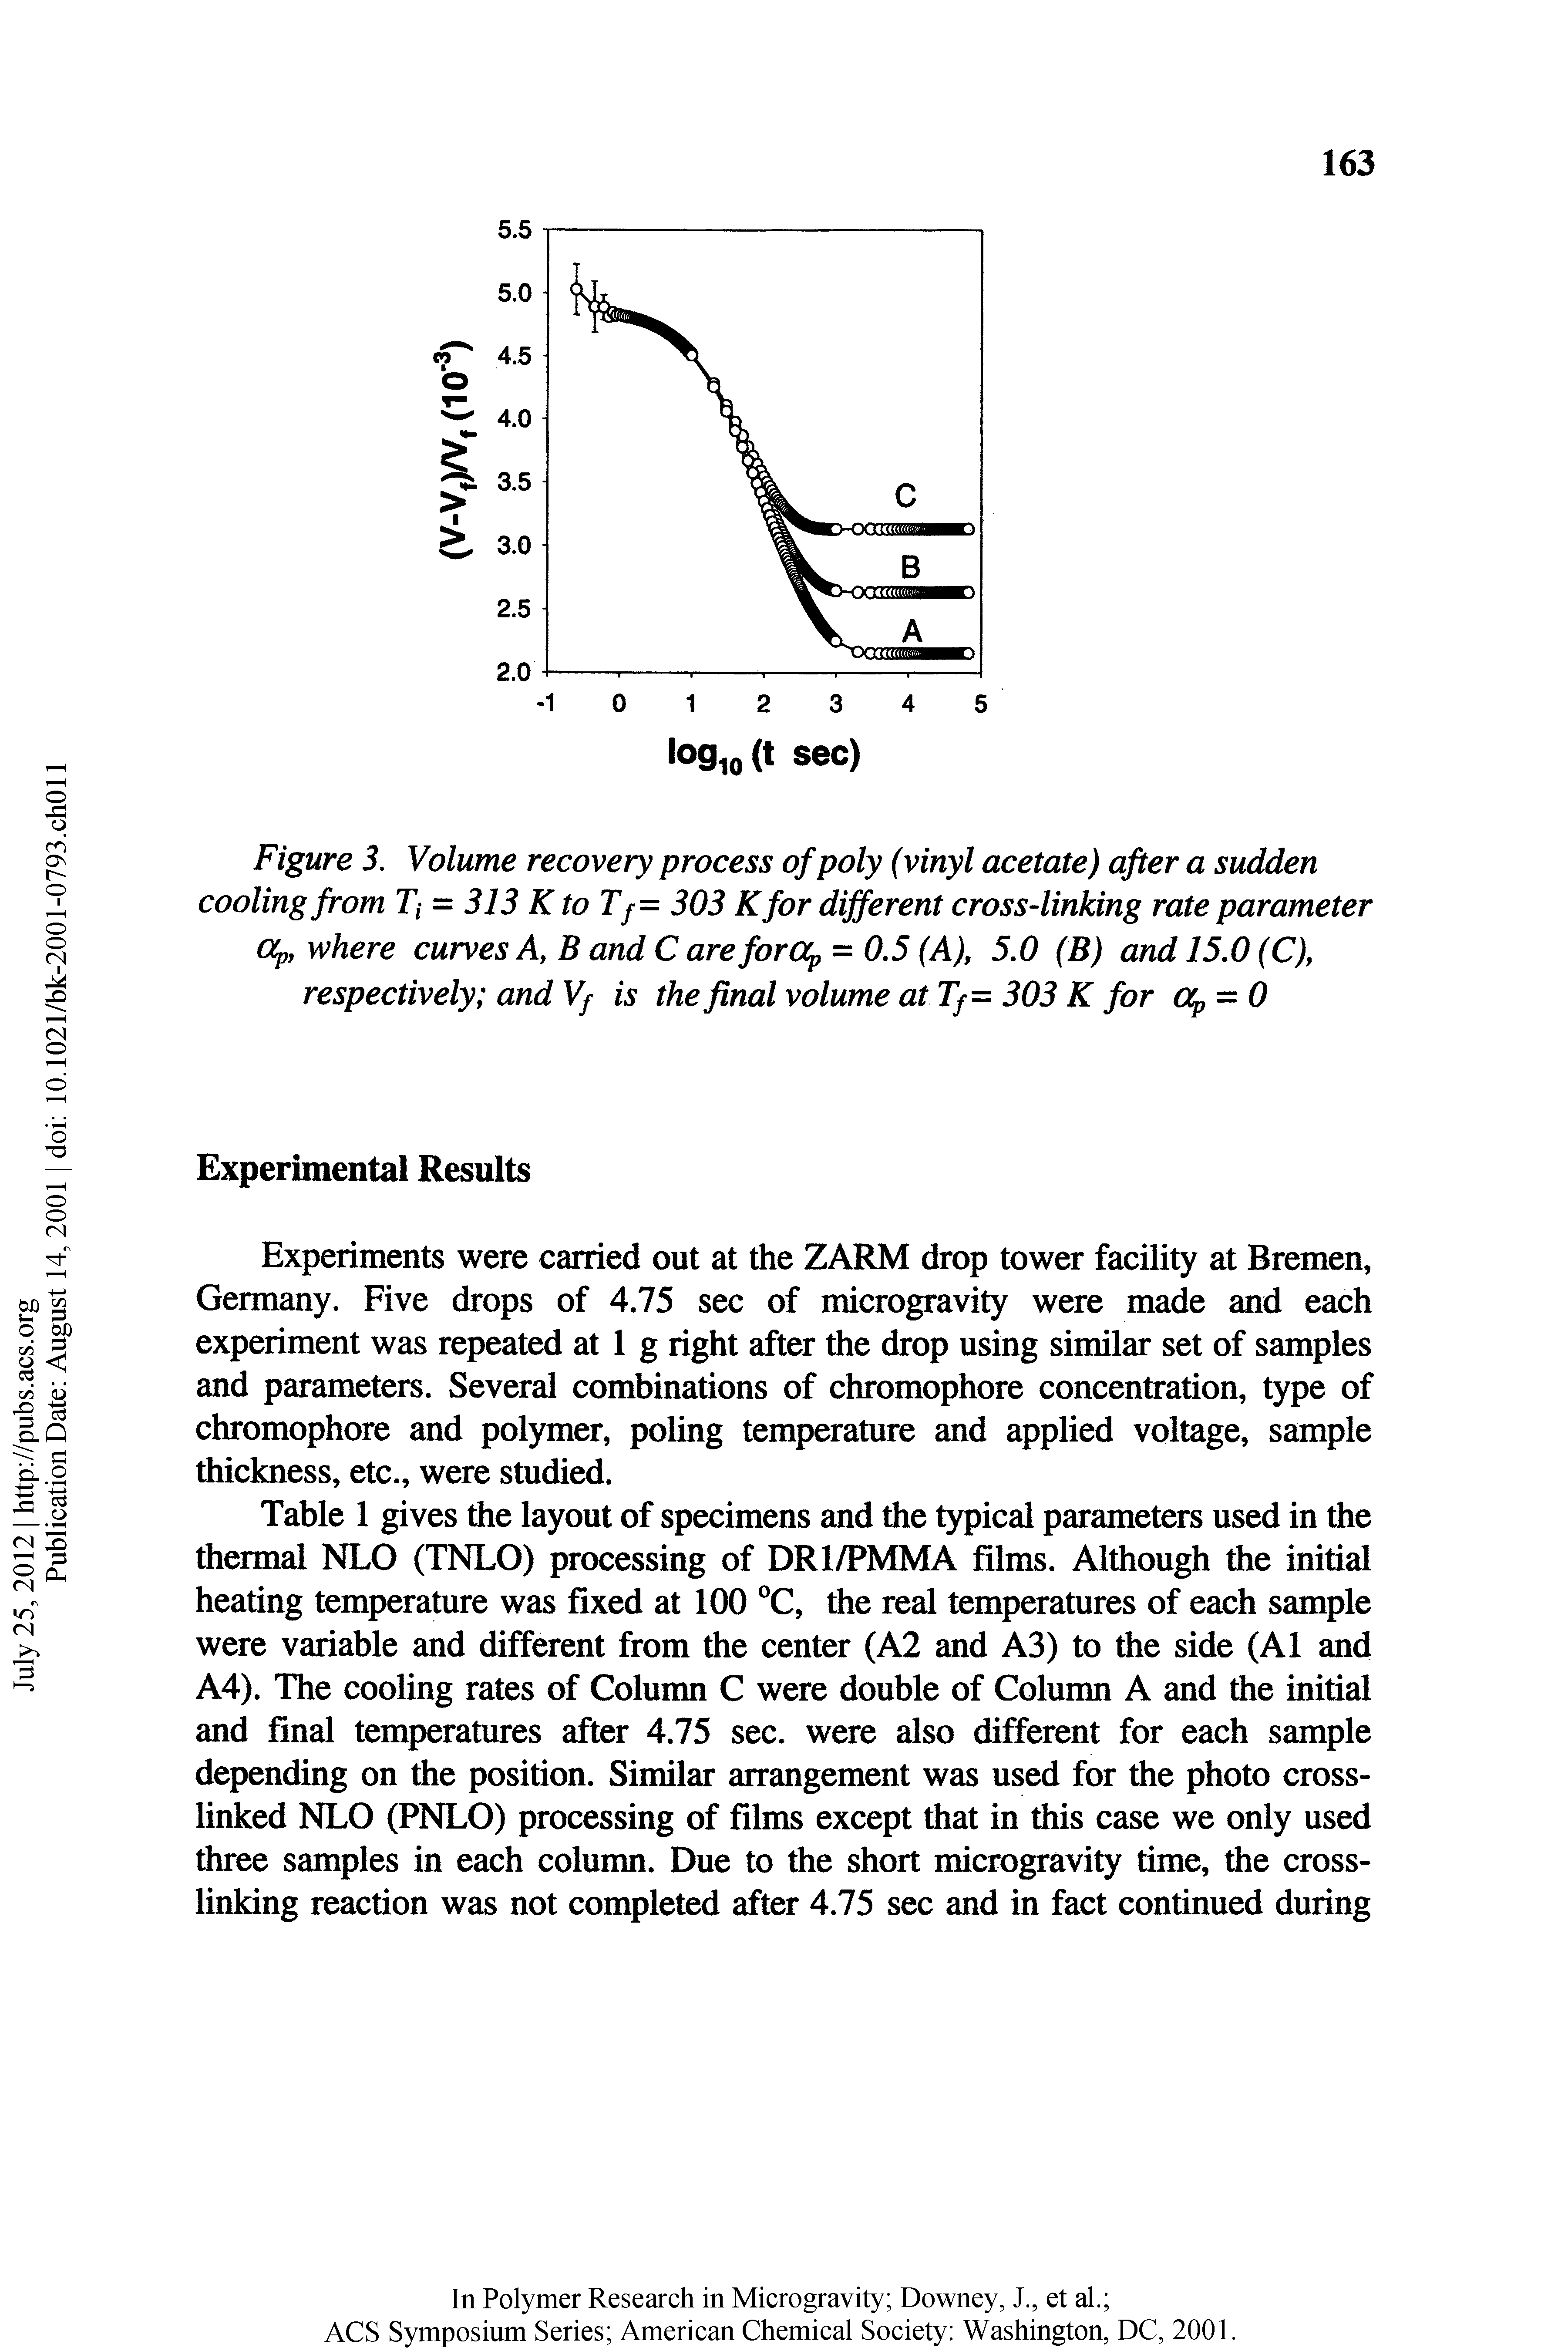 Figure 3. Volume recovery process of poly (vinyl acetate) after a sudden cooling from Ti = 313 K to Tf = 303 Kfor different crossAinking rate parameter Op, where curves A, B and C areforoCp = 0,5 (A), 5.0 (B) and 15.0 (C), respectively and Vf is the final volume at Tf= 303 K for o = 0...